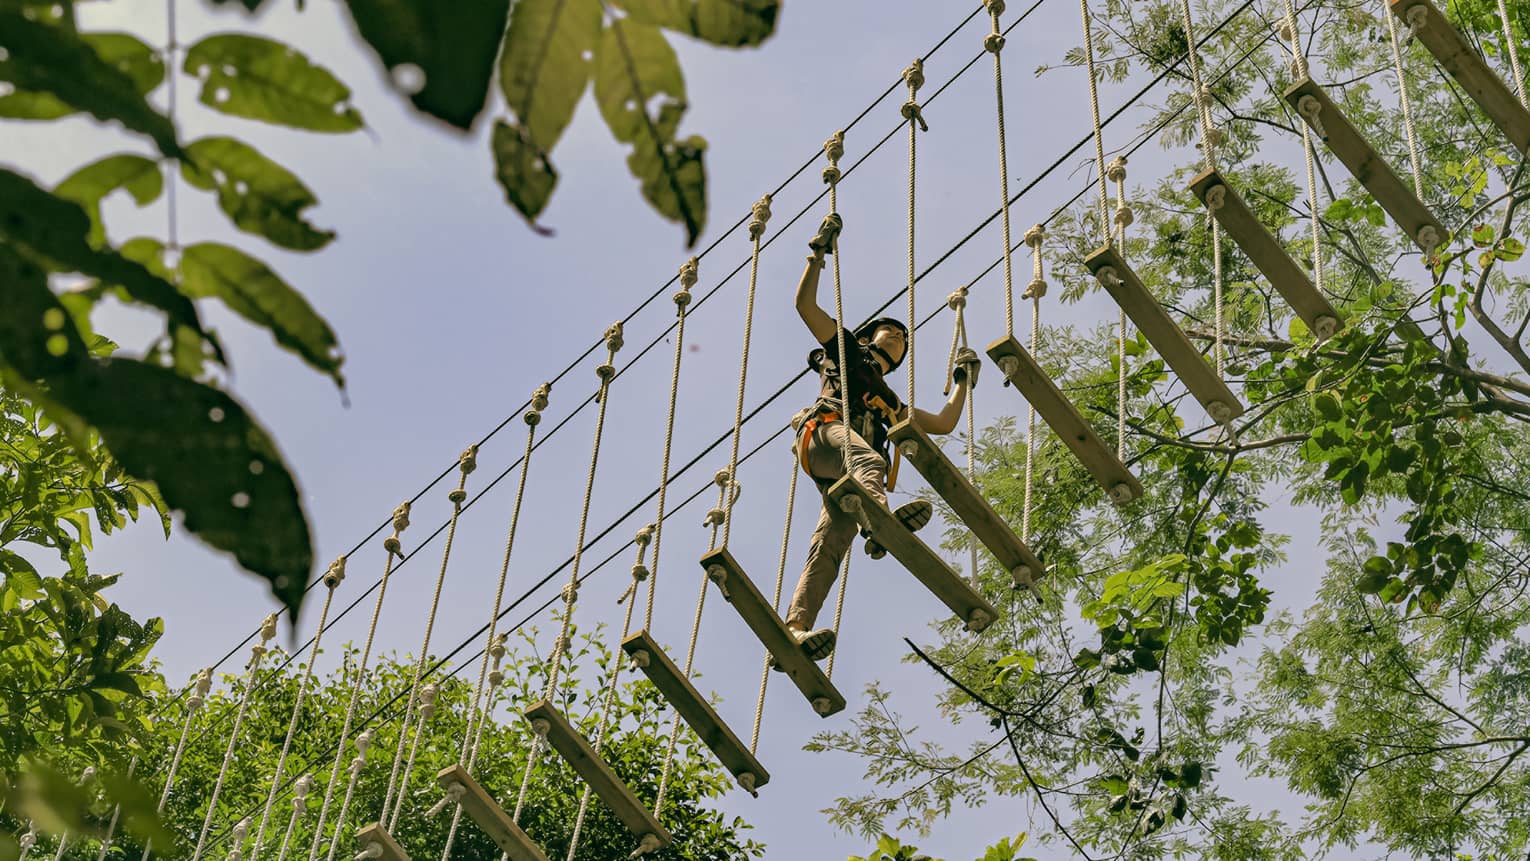 Overhead, a person crosses a bridge of wood planks suspended by ropes high above the forest canopy, surrounded by trees.